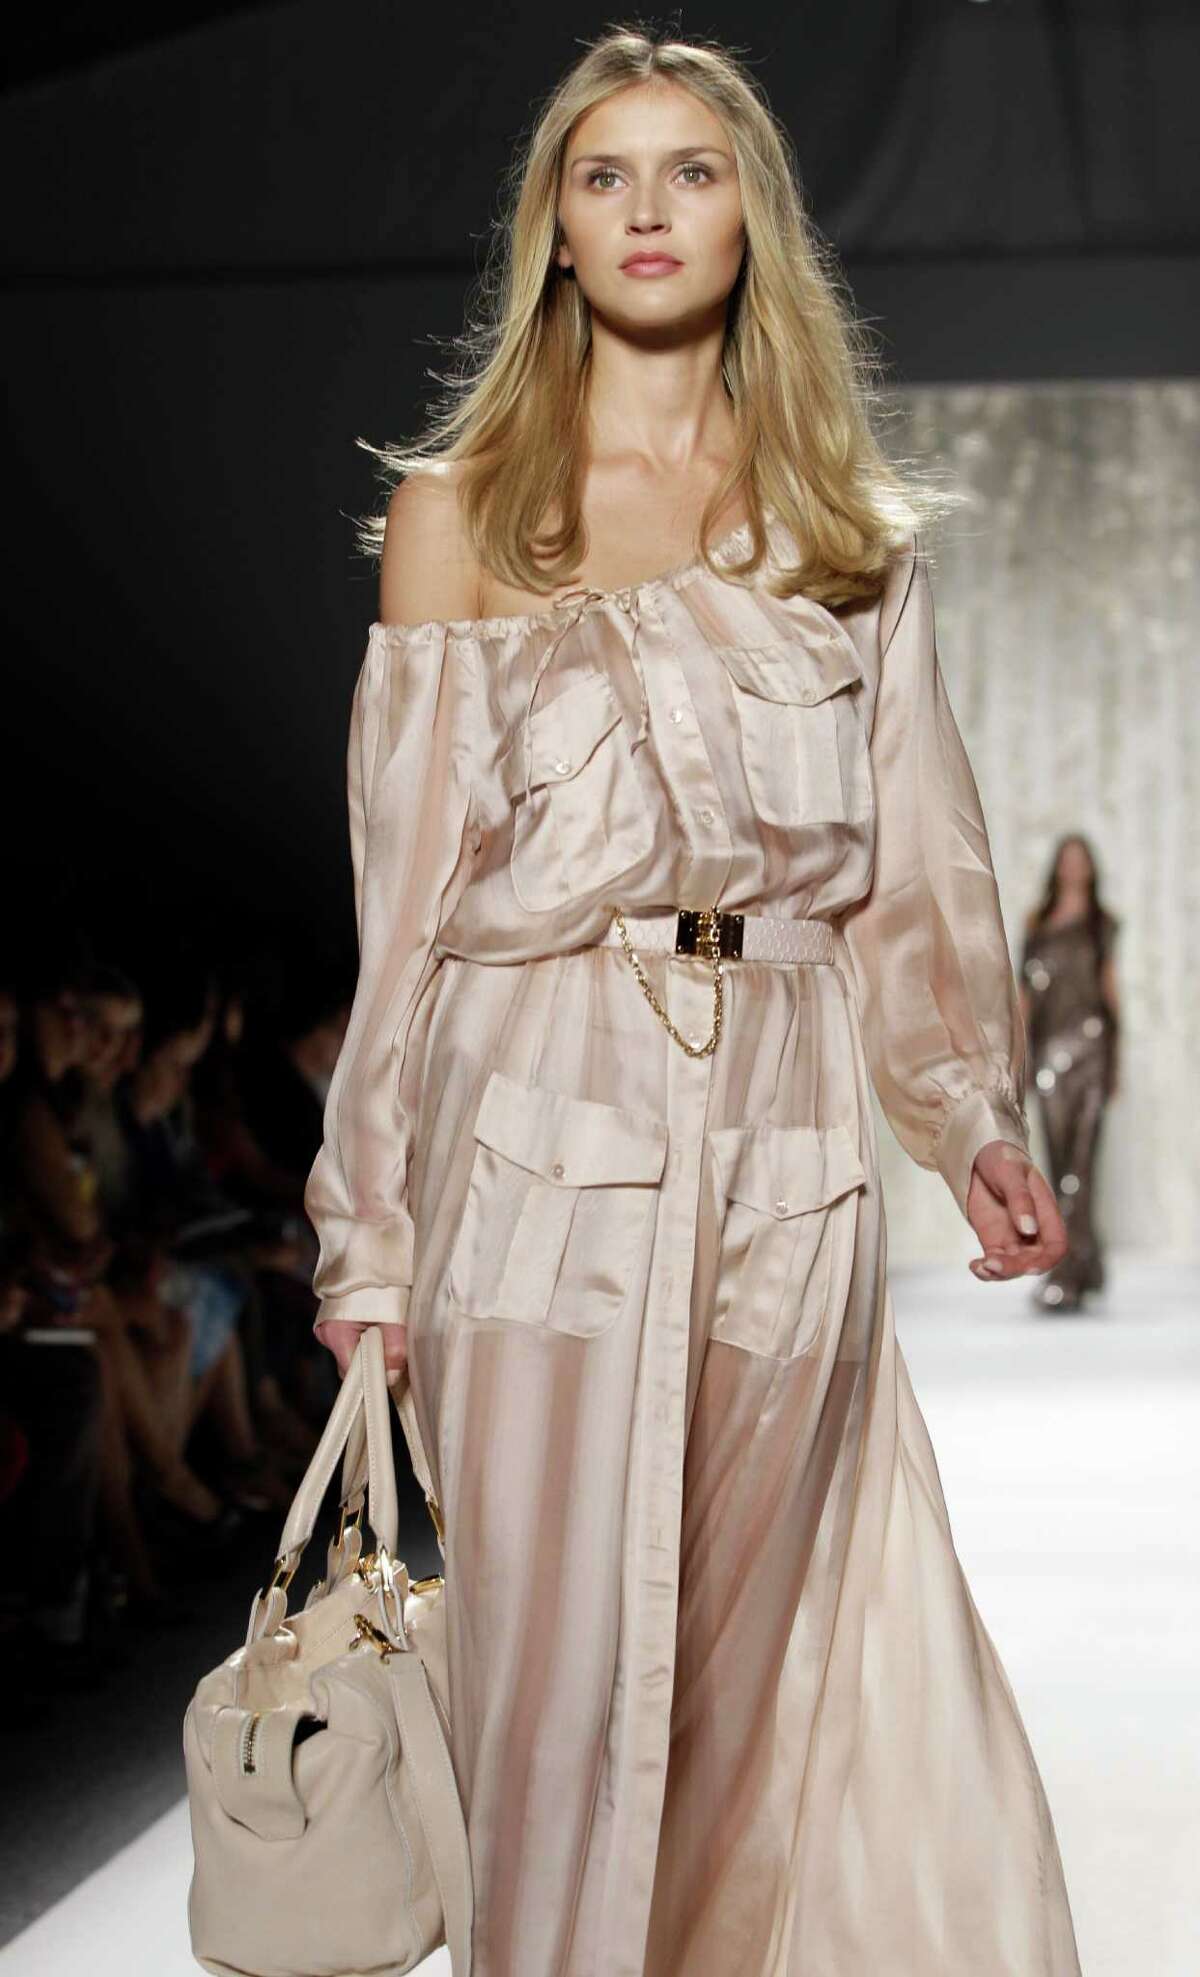 A model wears a design from the Rachel Zoe Spring 2013 collection.